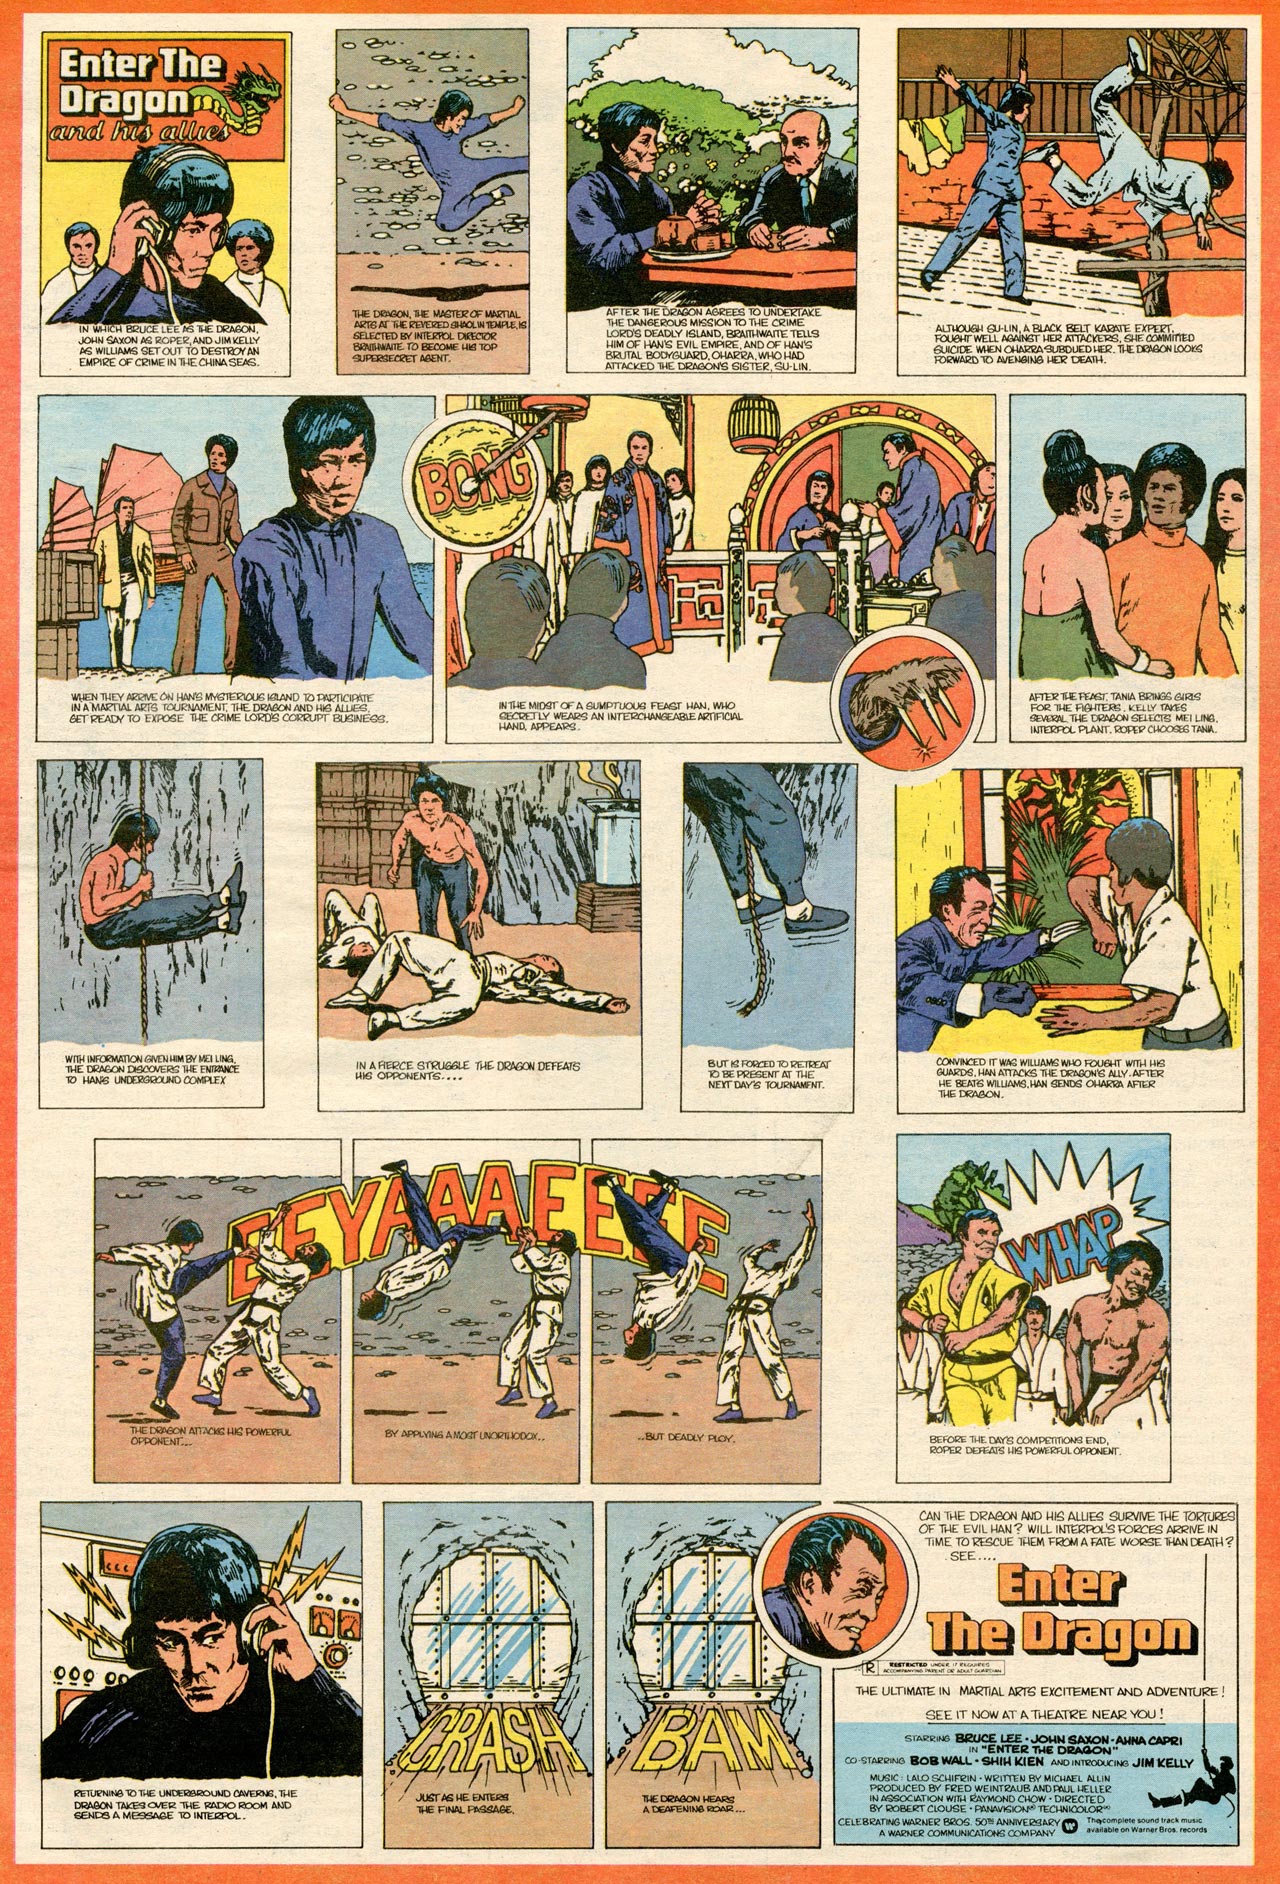 ‘Enter the Dragon’: Incredible comic advertisement for Bruce Lee’s swan song ...1280 x 1884